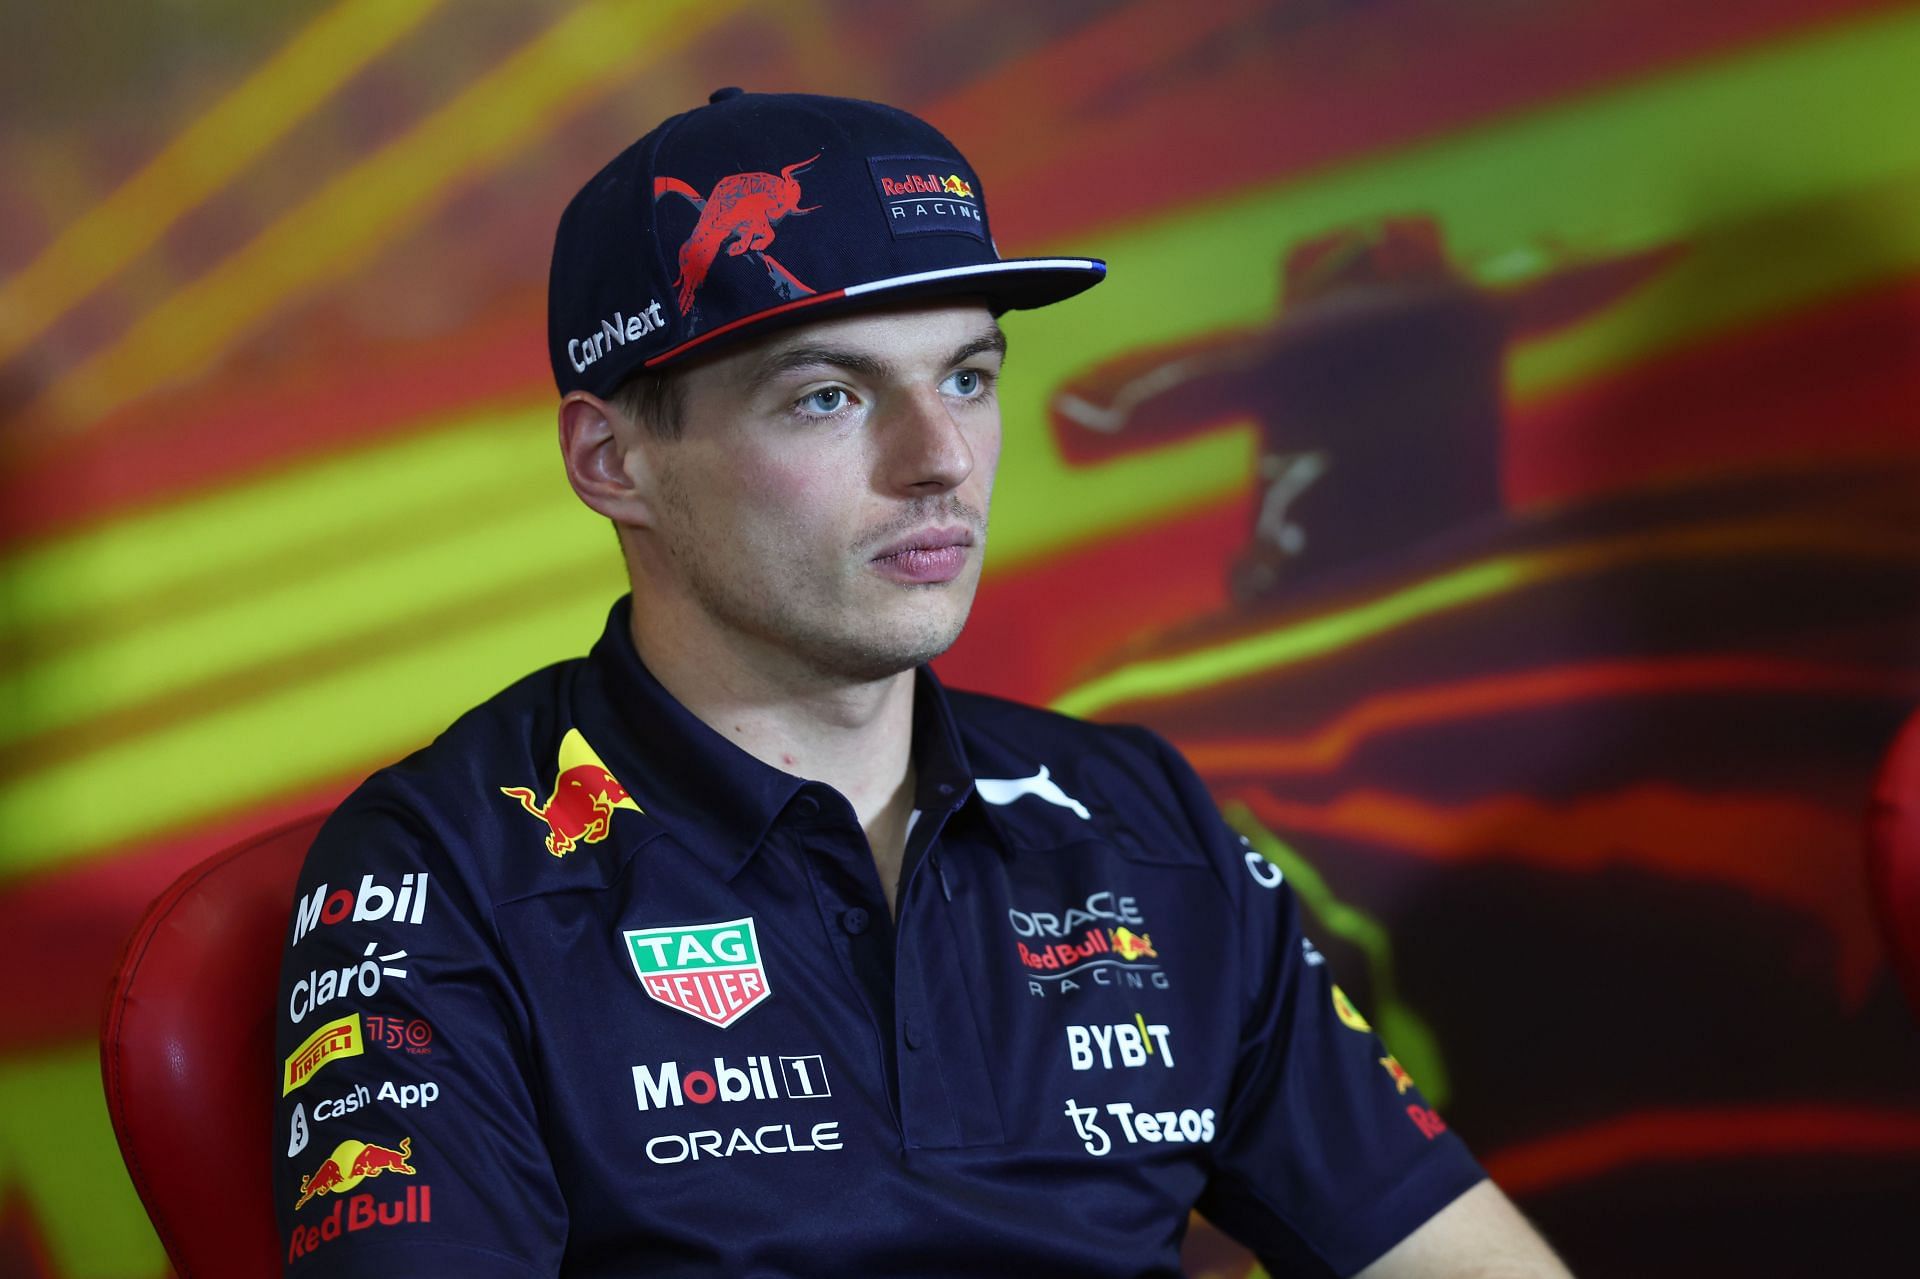 Max Verstappen at the F1 Grand Prix of Spain - Practice